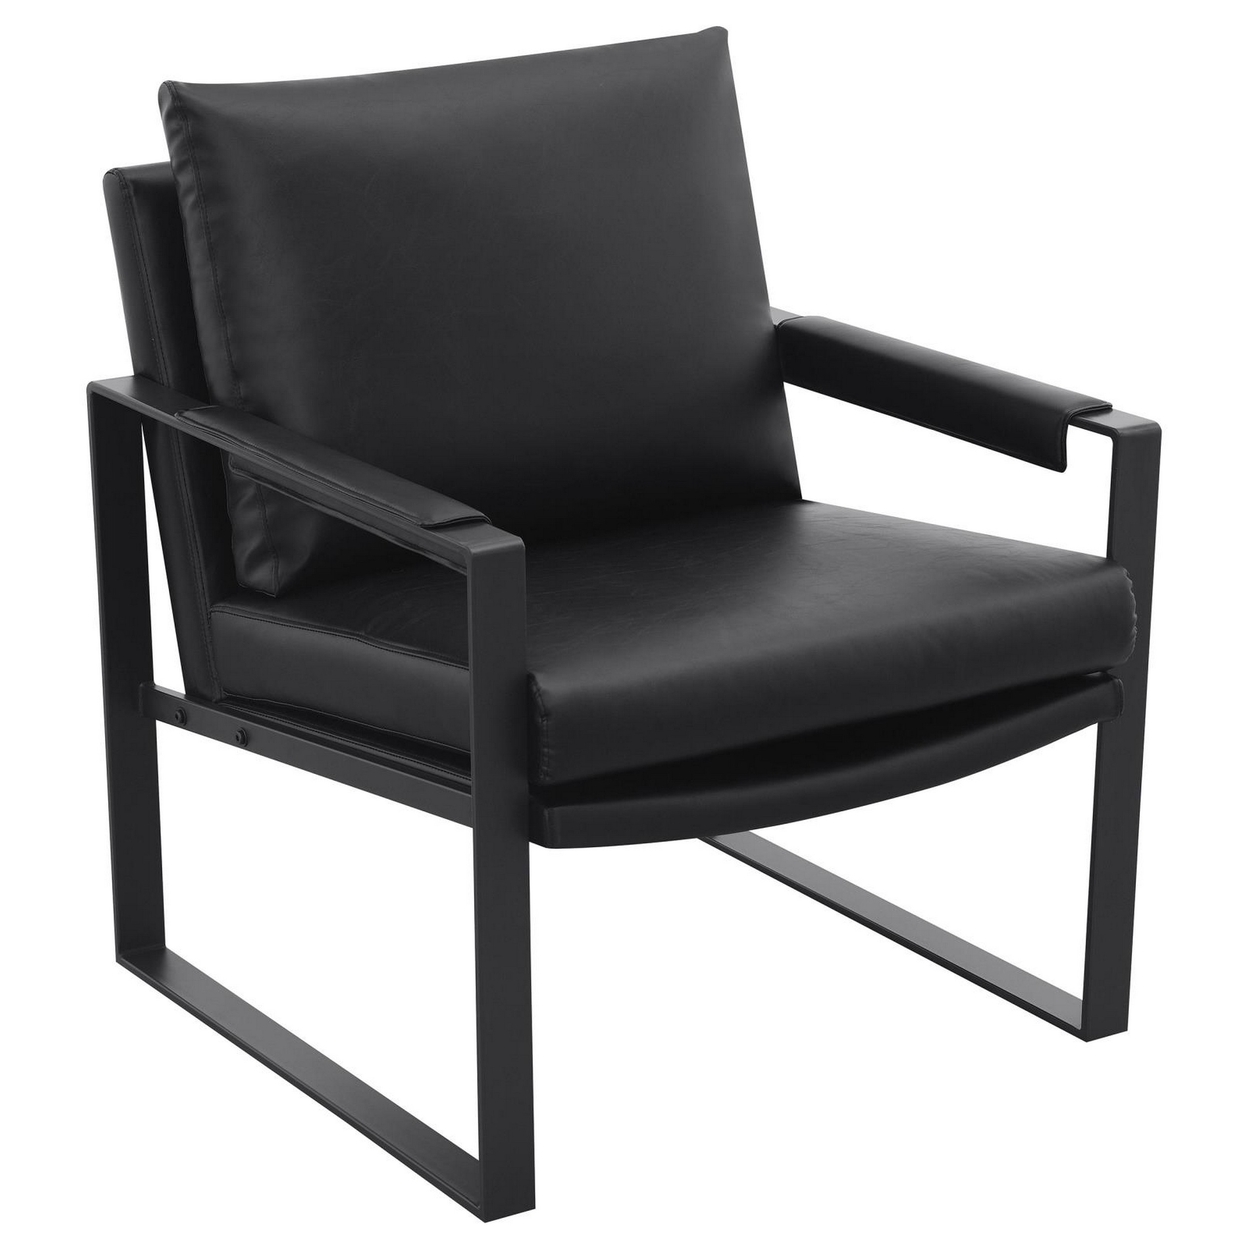 Rosy 28 Inch Accent Armchair, Vegan Faux Leather, Black And Charcoal Finish -Saltoro Sherpi